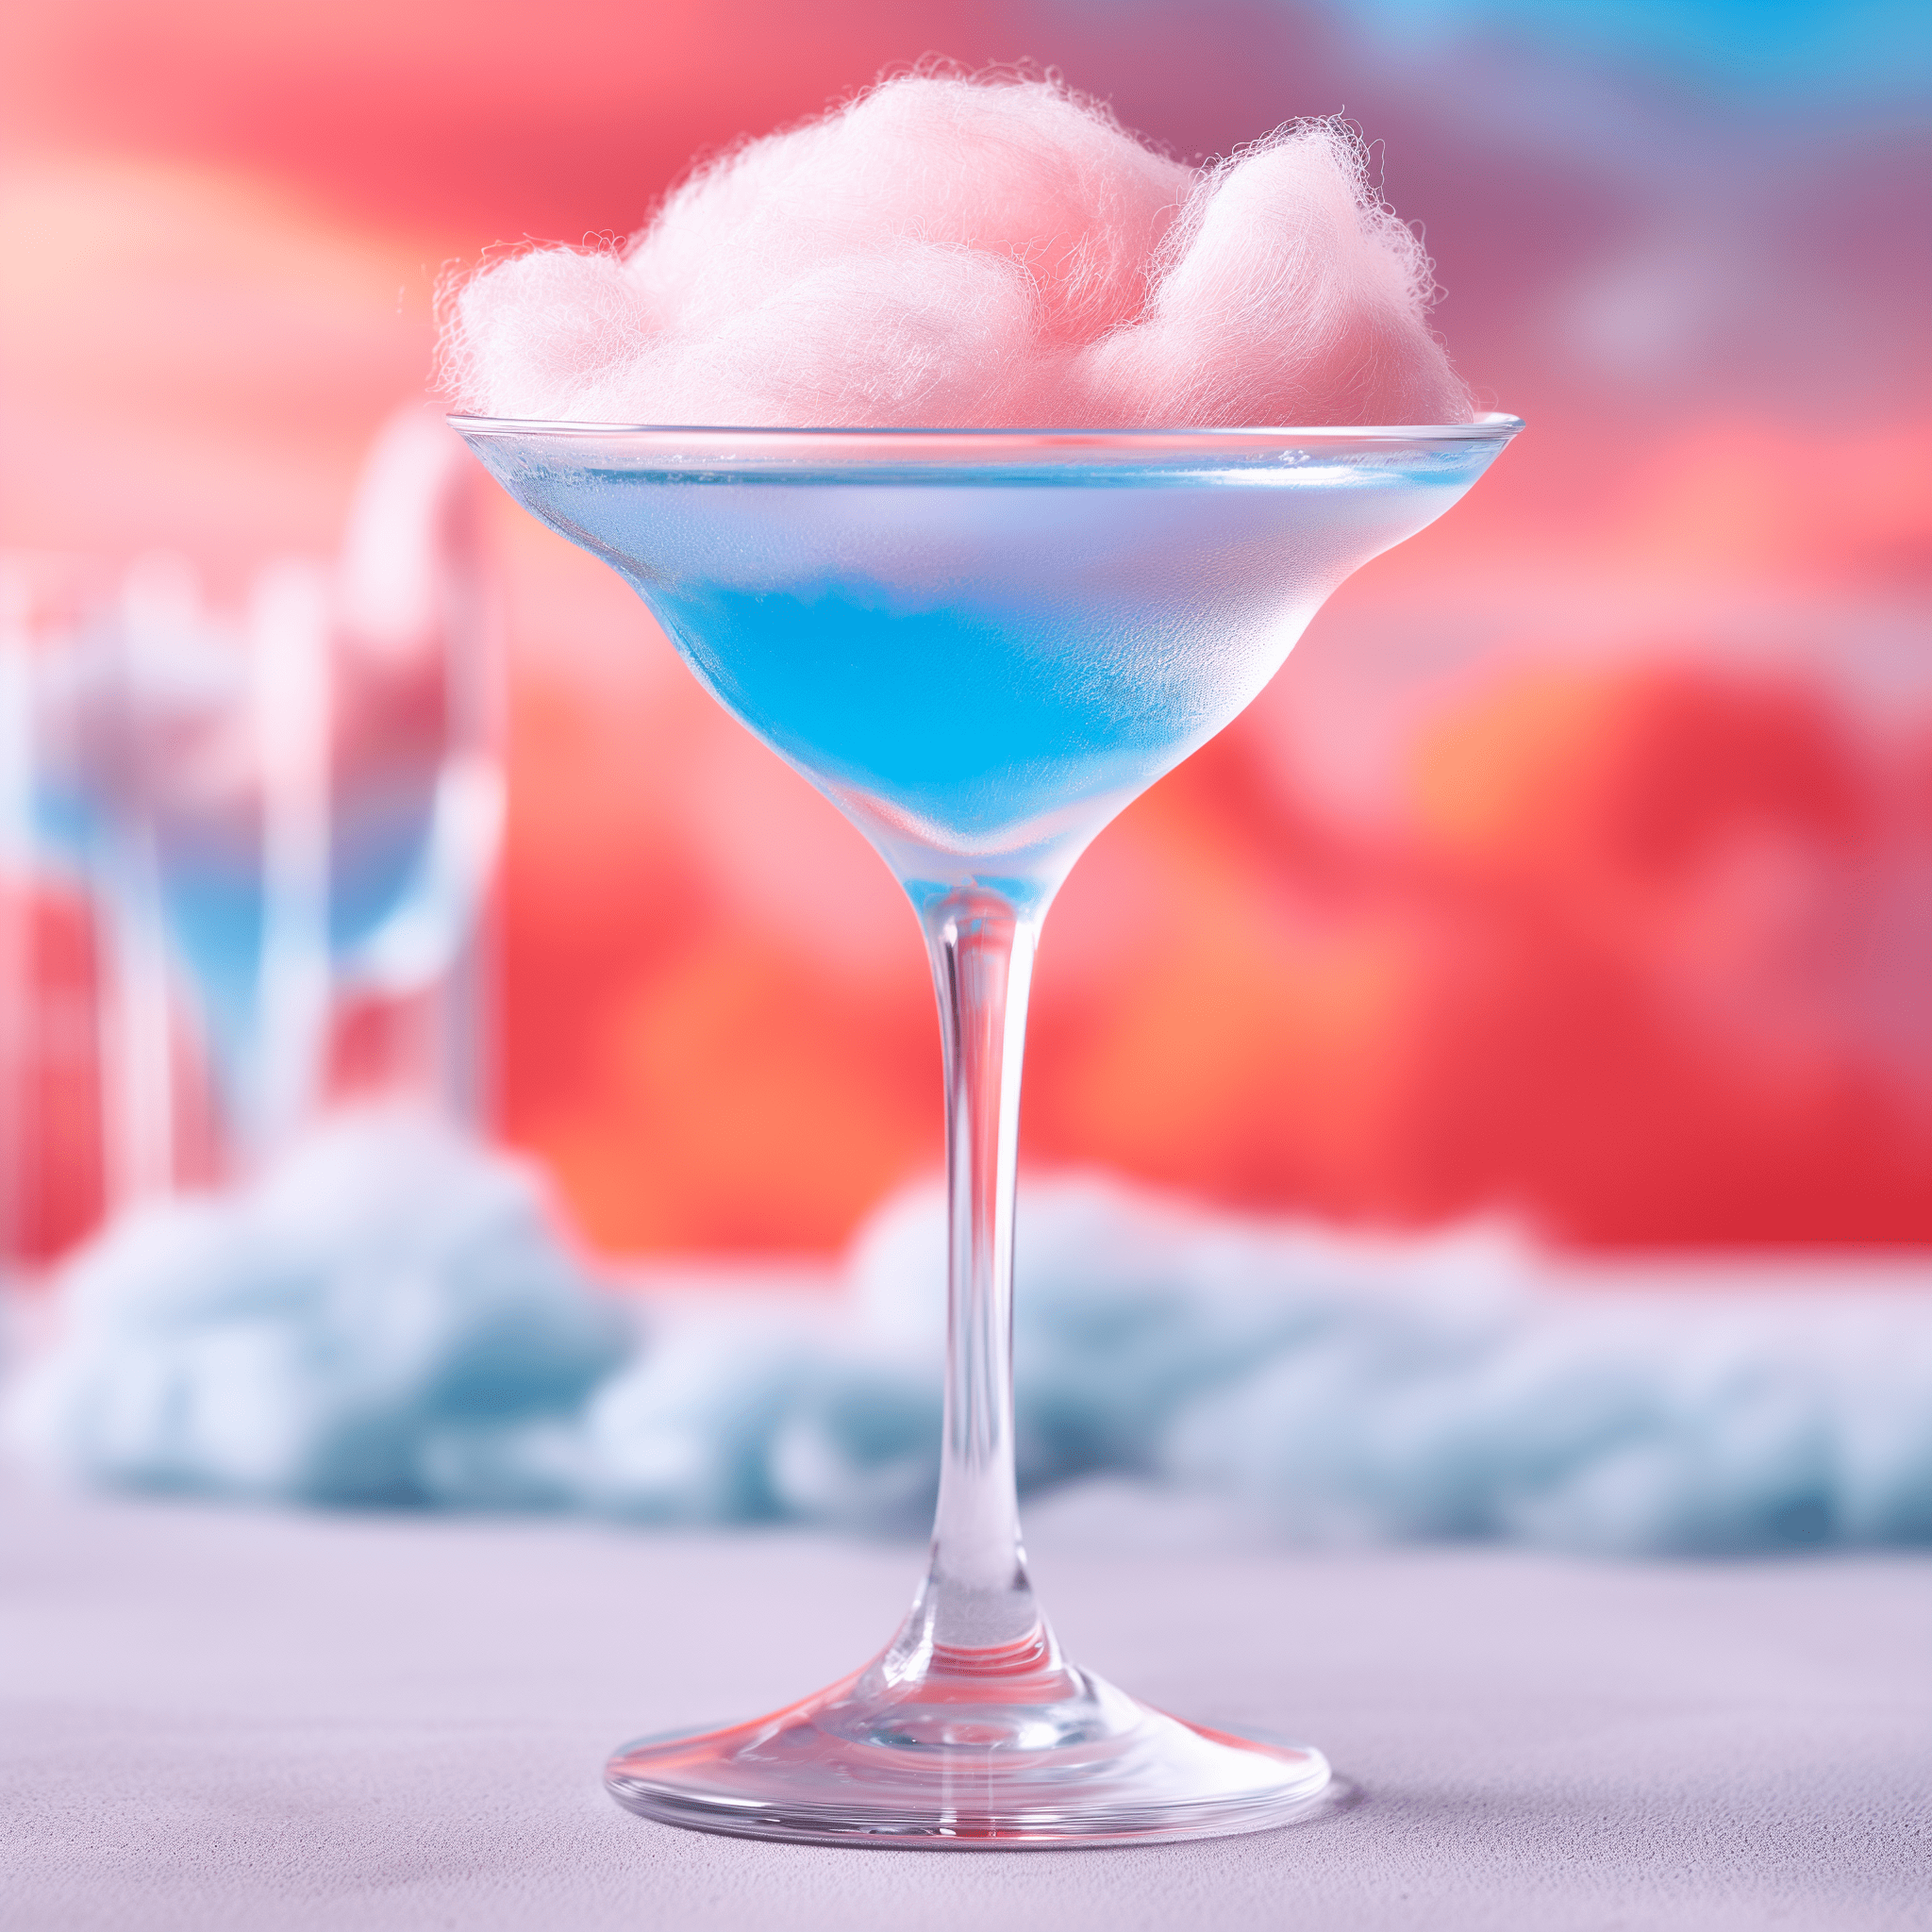 Cotton Candy Martini Cocktail Recipe - The Cotton Candy Martini is a sweet, whimsical cocktail with a hint of tanginess from the lemon juice. The vanilla vodka provides a smooth, creamy base, while the blue cotton candy syrup adds a playful, sugary note. The white cranberry juice balances the sweetness with a slight tartness, making the drink a delightful concoction.